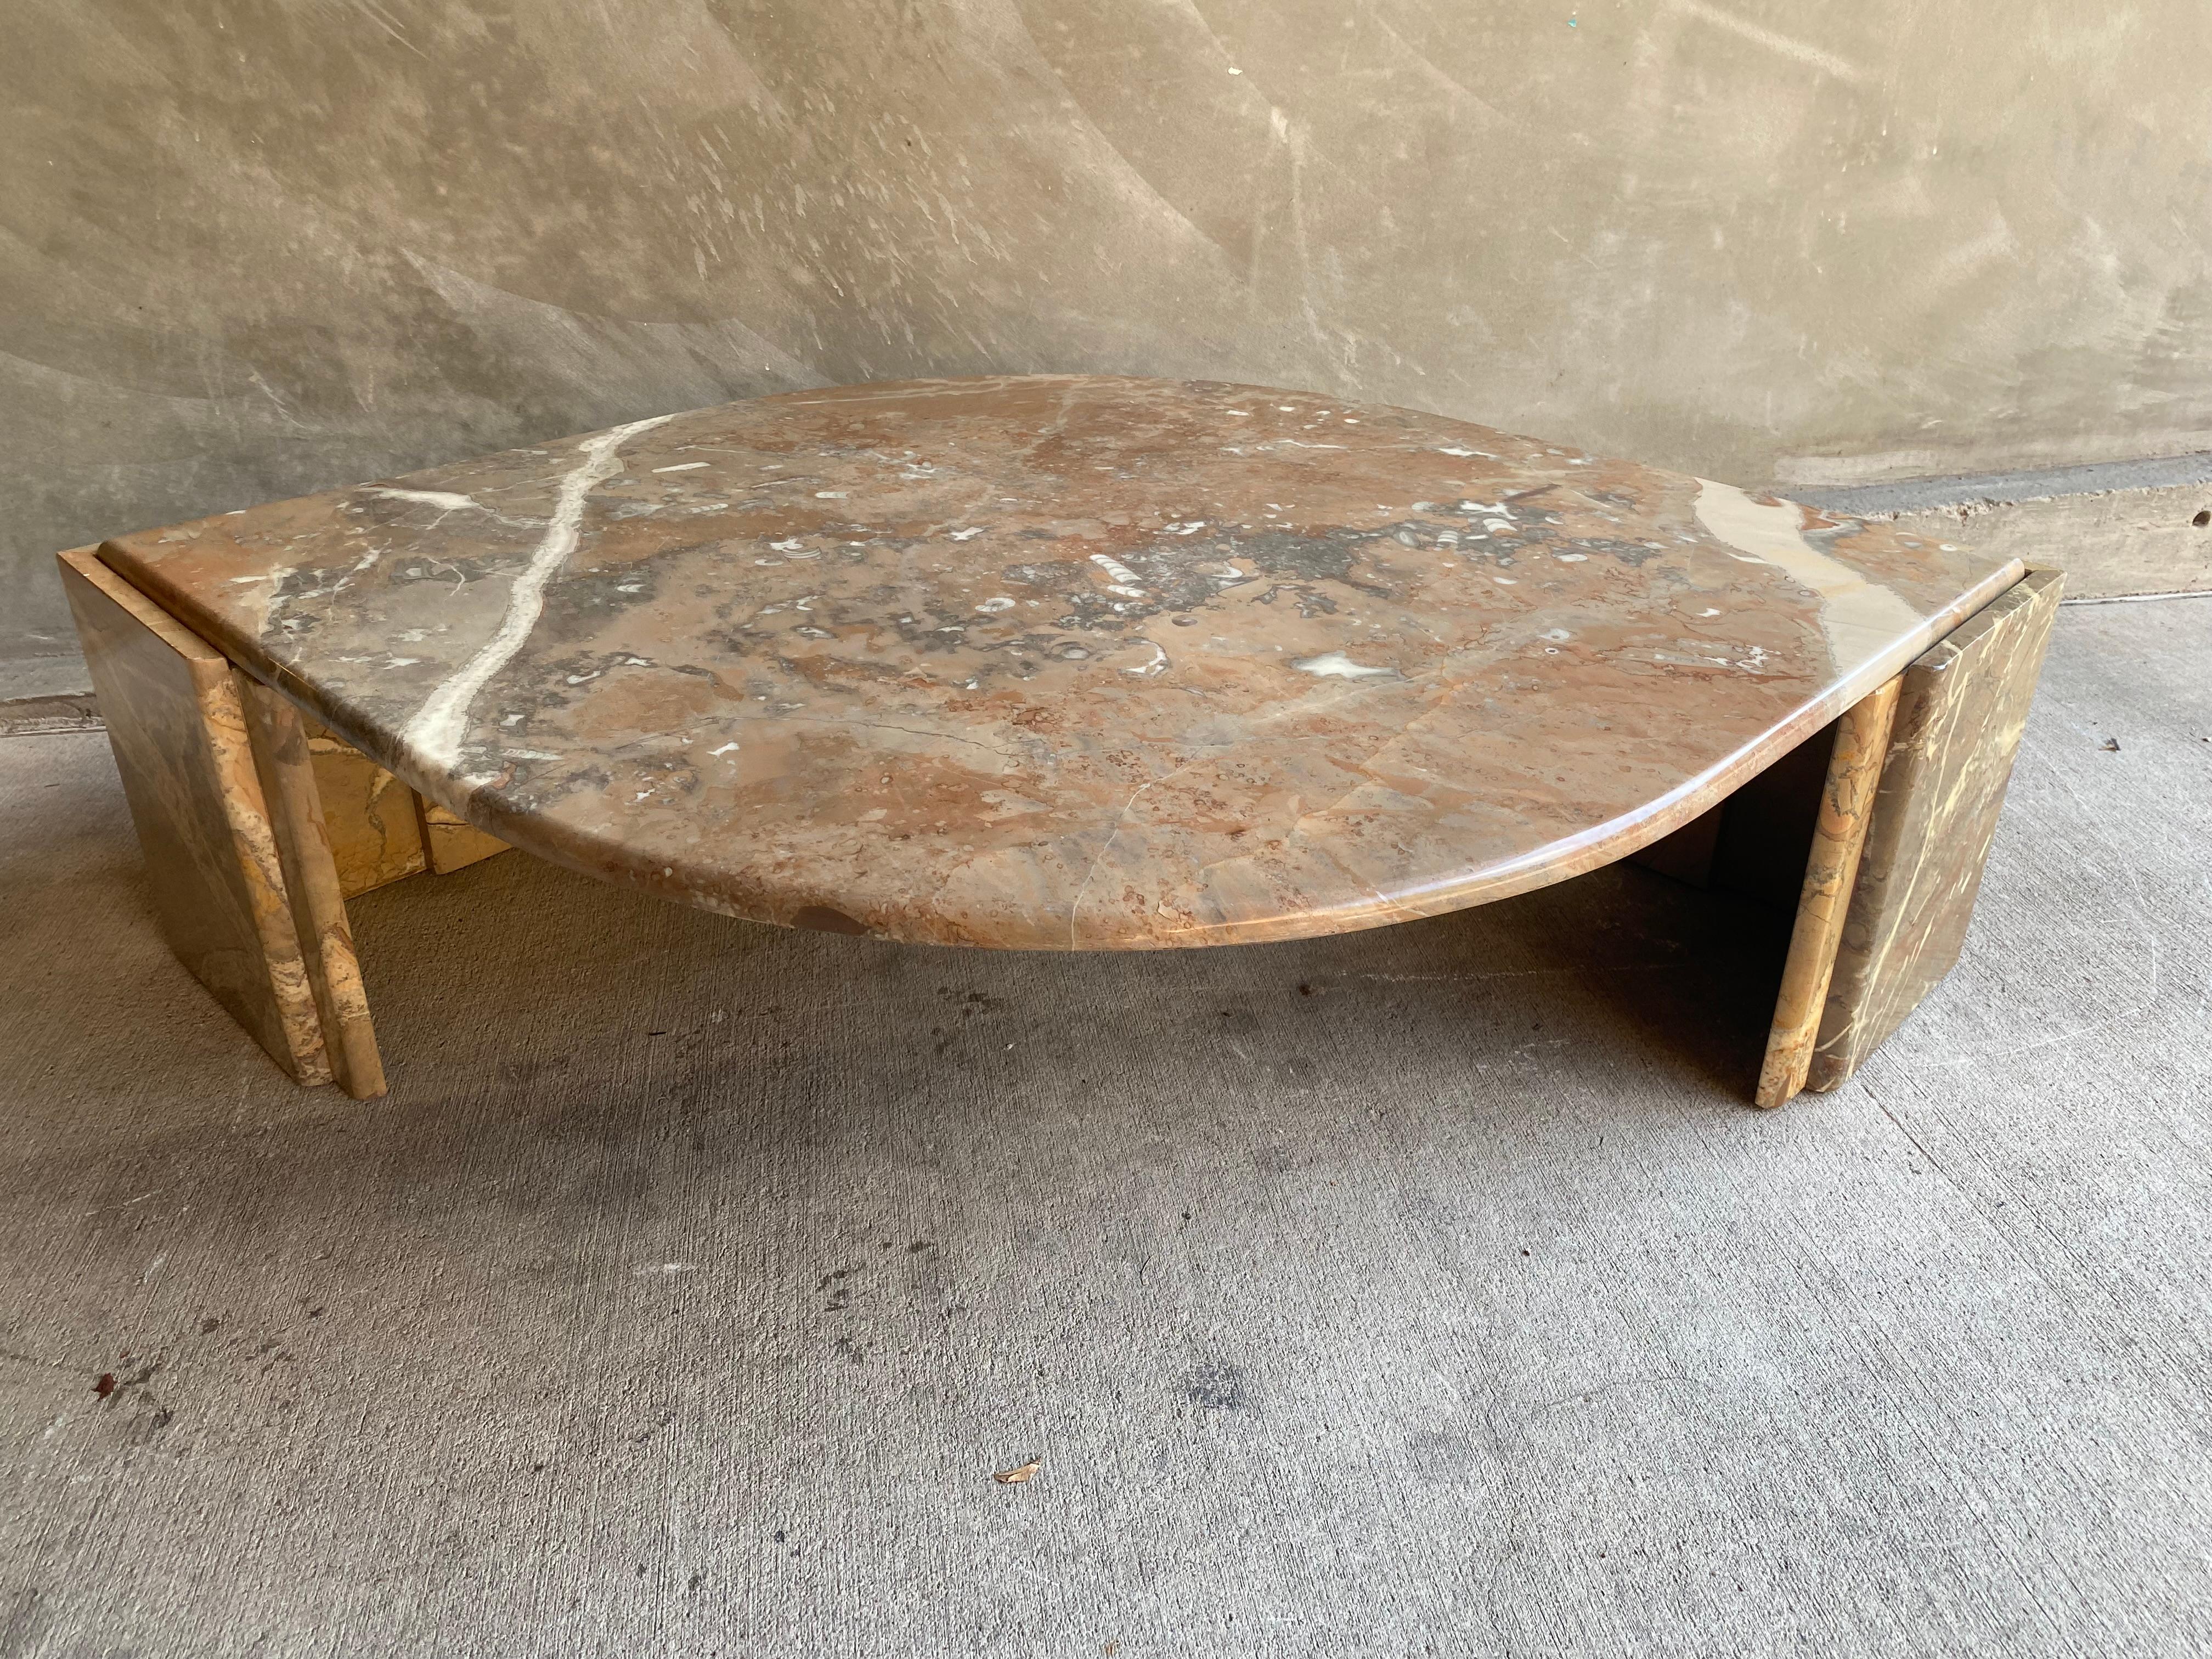 Sumptuous rust, sand and grey colored marble cocktail table. Teardrop shape with matching marble pedestals. Attr. Ligne Roset, France, 1980's.